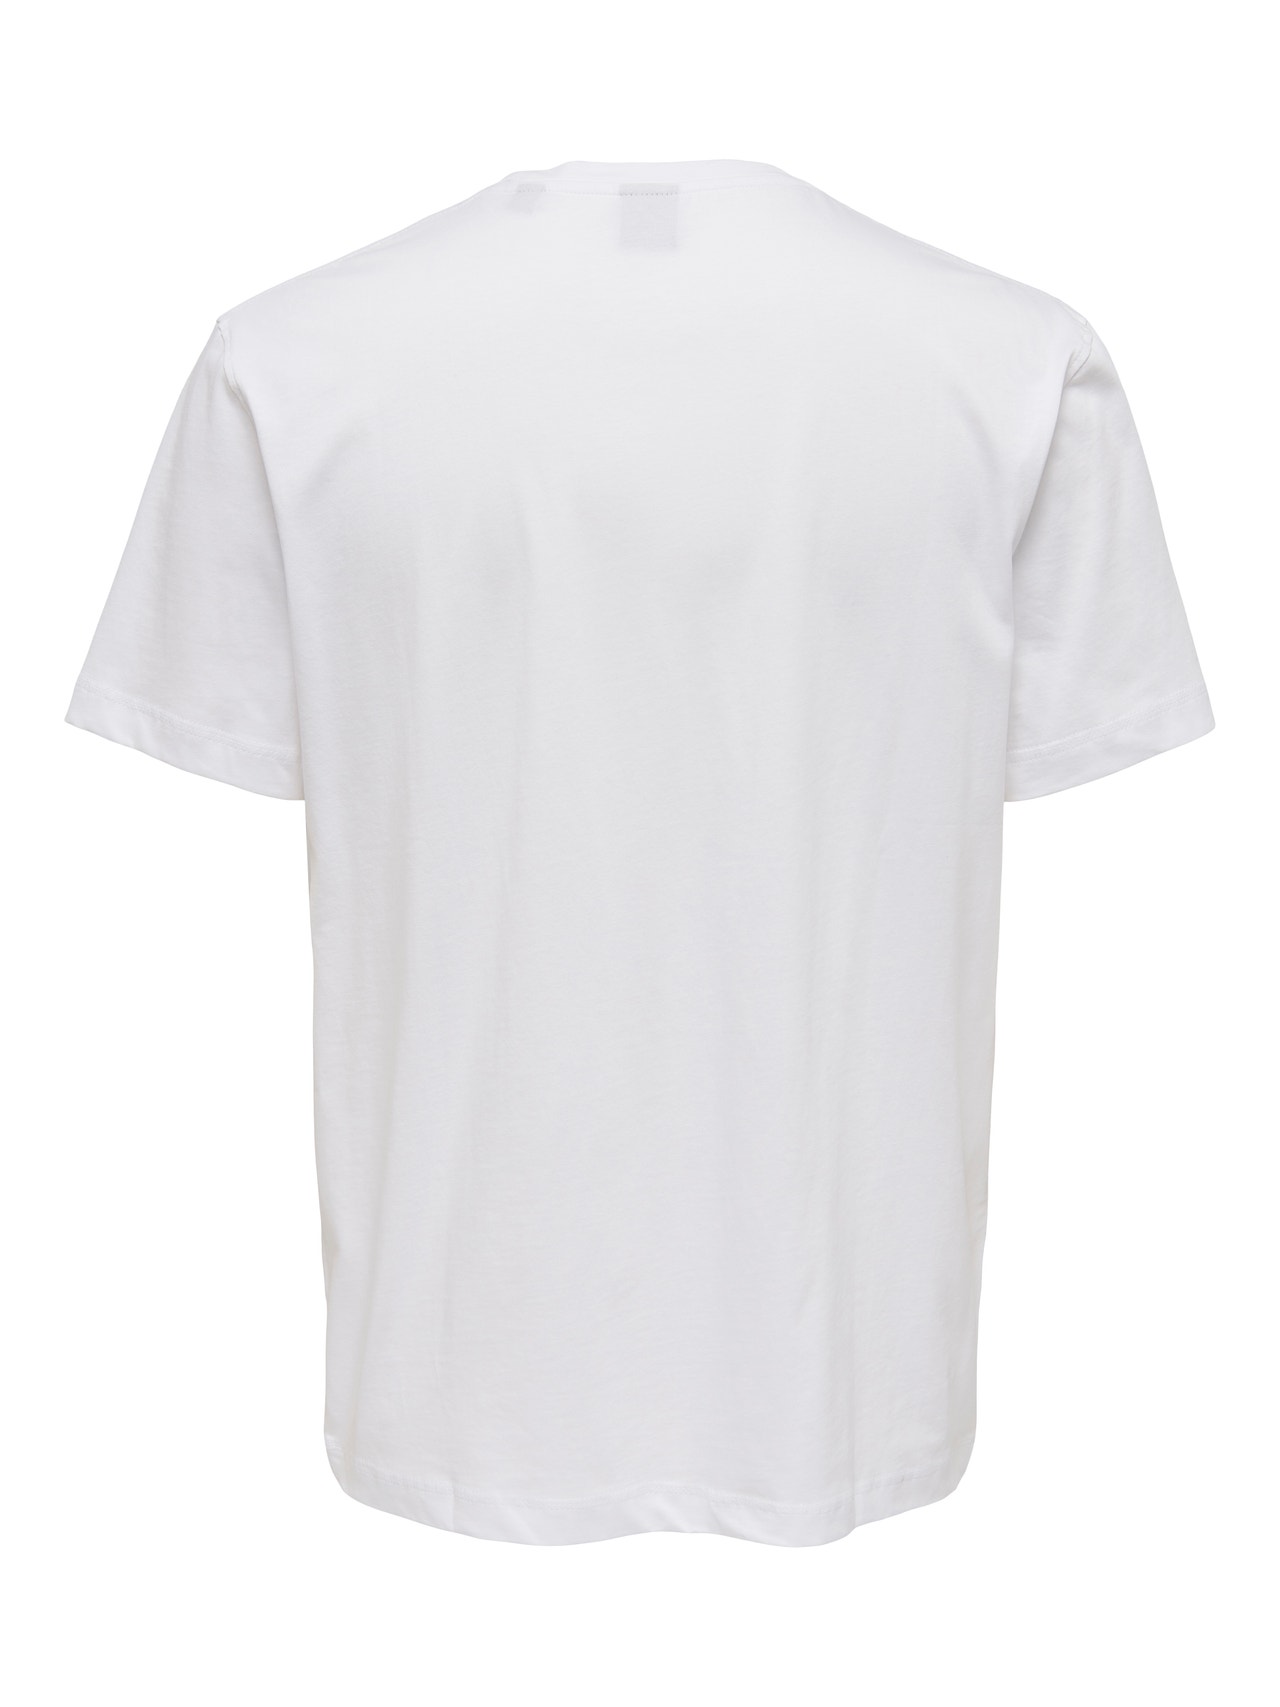 ONLY & SONS O-neck t-shirt -White - 22025208